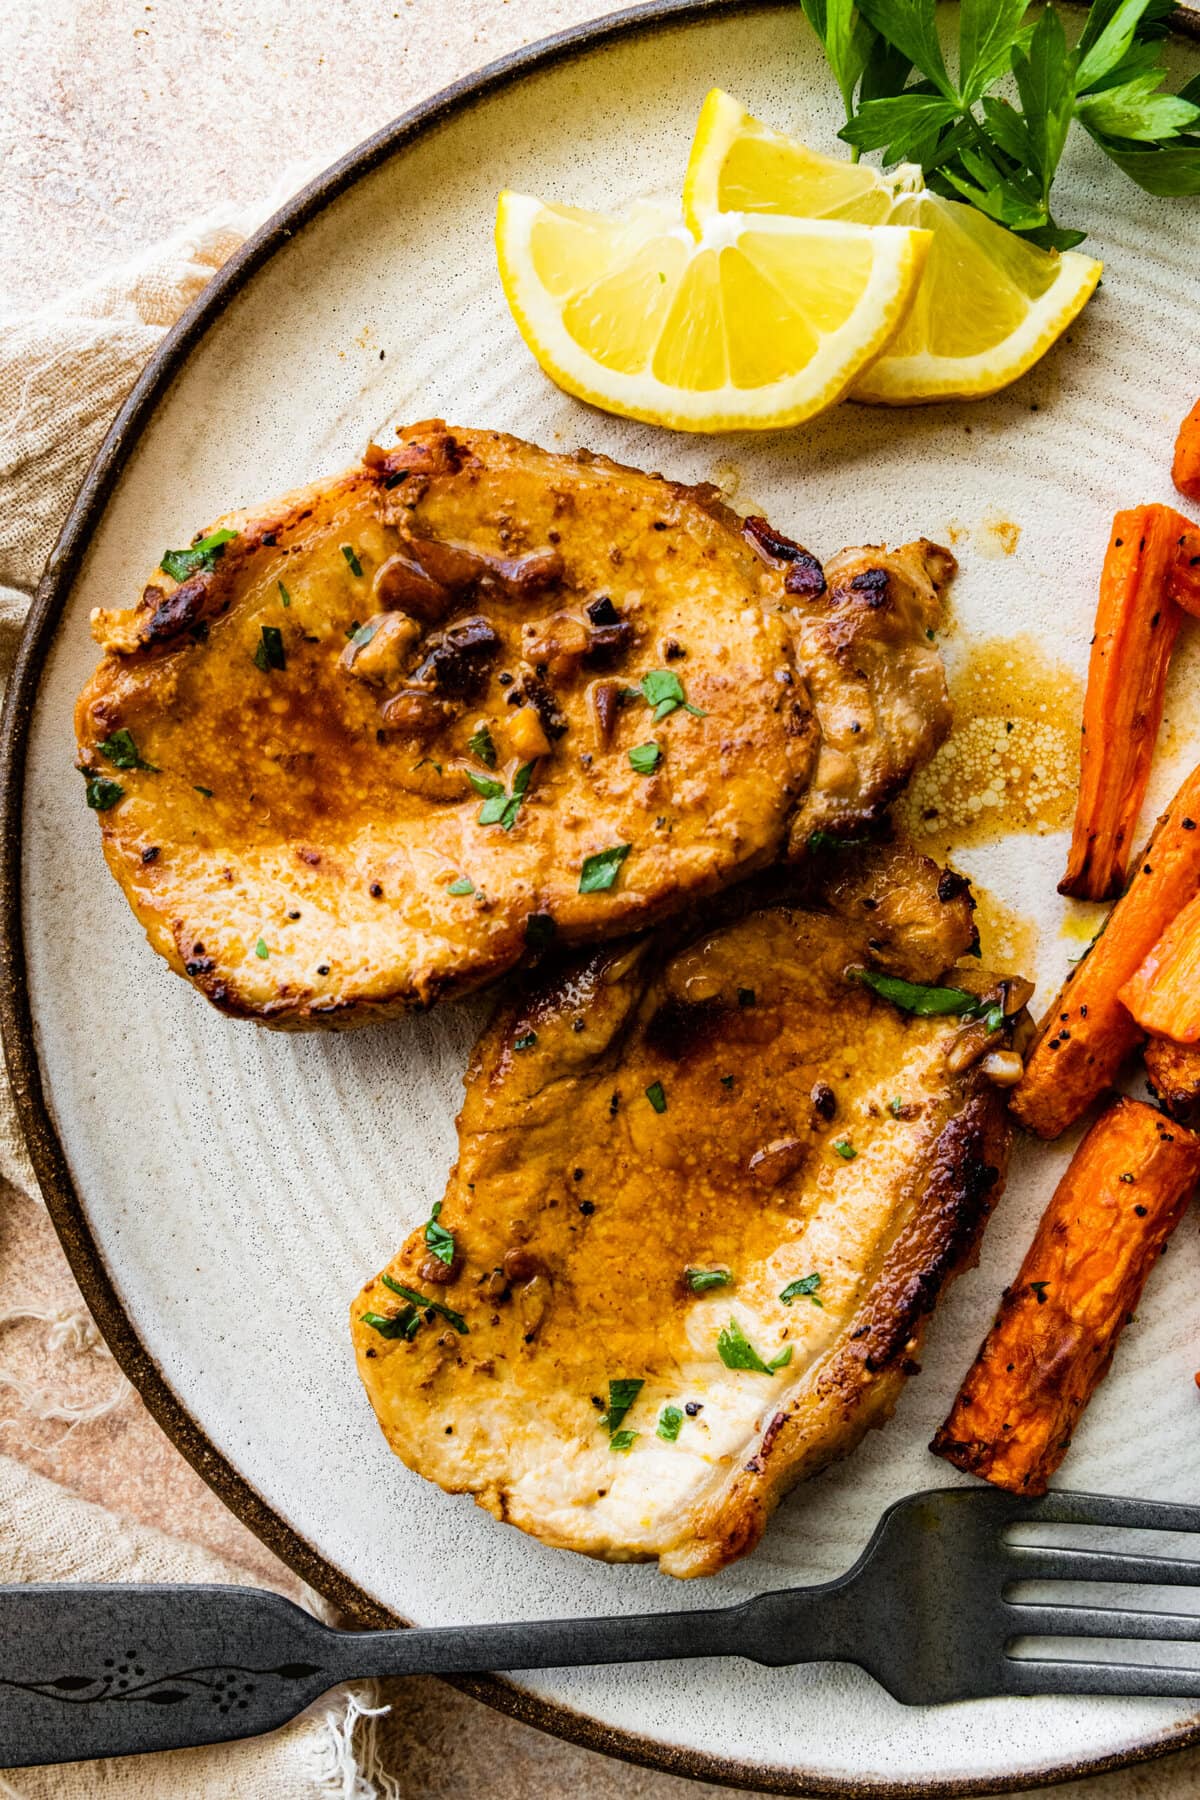 two juicy thin pork chops on a plate wit cooked carrots as a side dish.